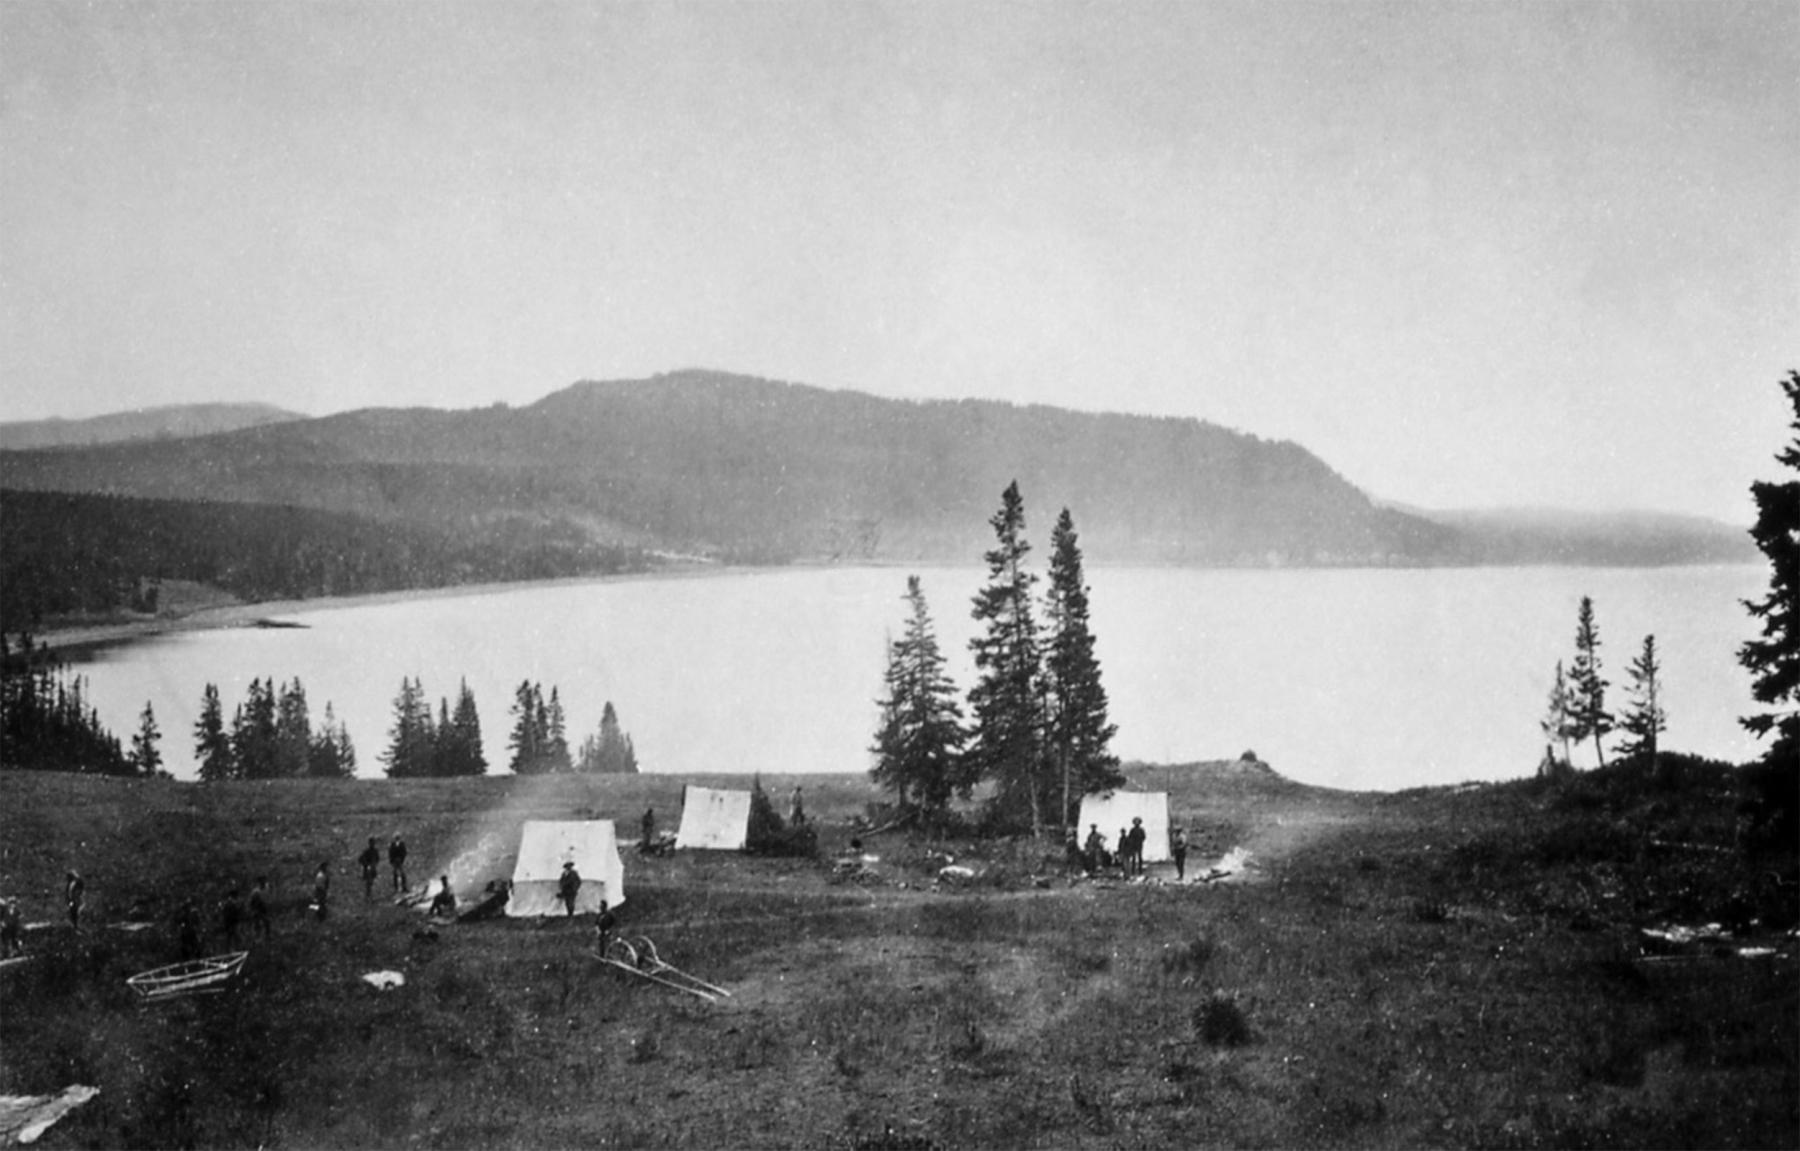 “Earthquake Camp” at Yellowstone Lake. In the foreground at left are the frame of the Annie and, left of center, the odometer cart. The group felt several earthquakes while camped here, causing horses and men to suddenly leap to their feet. William Henry Jackson photo, 1871., U.S. Geological Survey via the National Park Service.